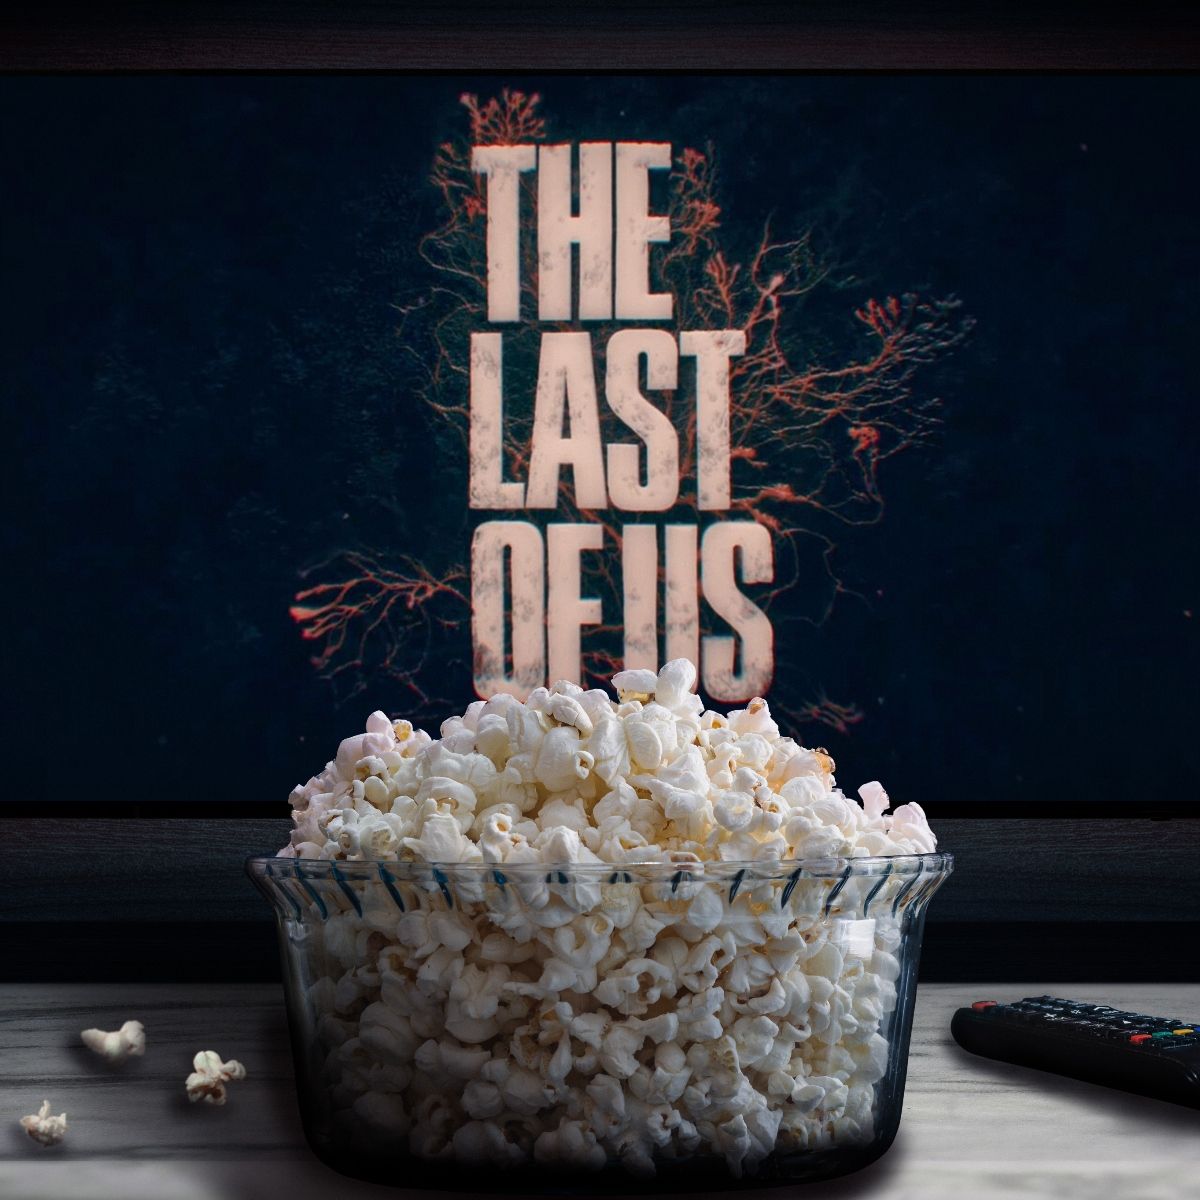 Tv in the background with The Last of Us on the screen and in front a bowl of popcorn and a remote control